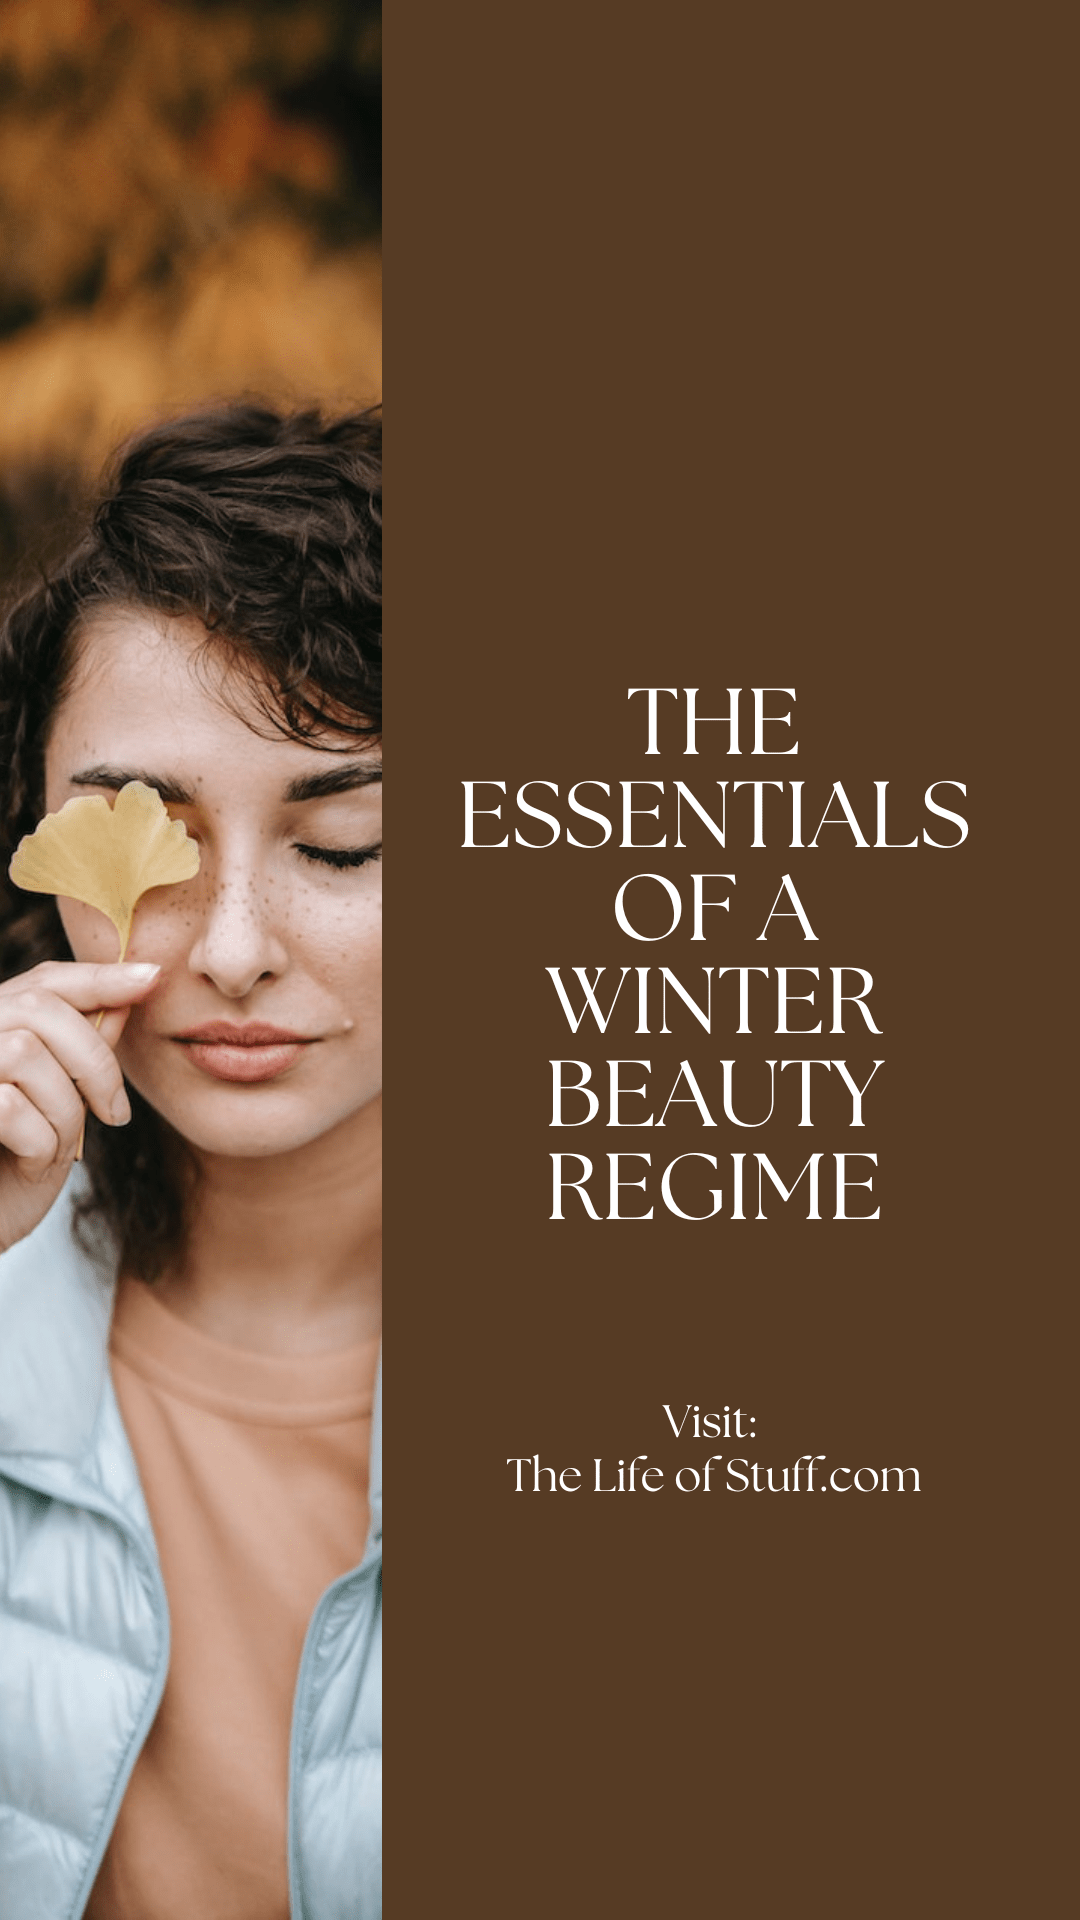 The Essentials of a Winter Beauty Regime - Short Guide - The Life of Stuff